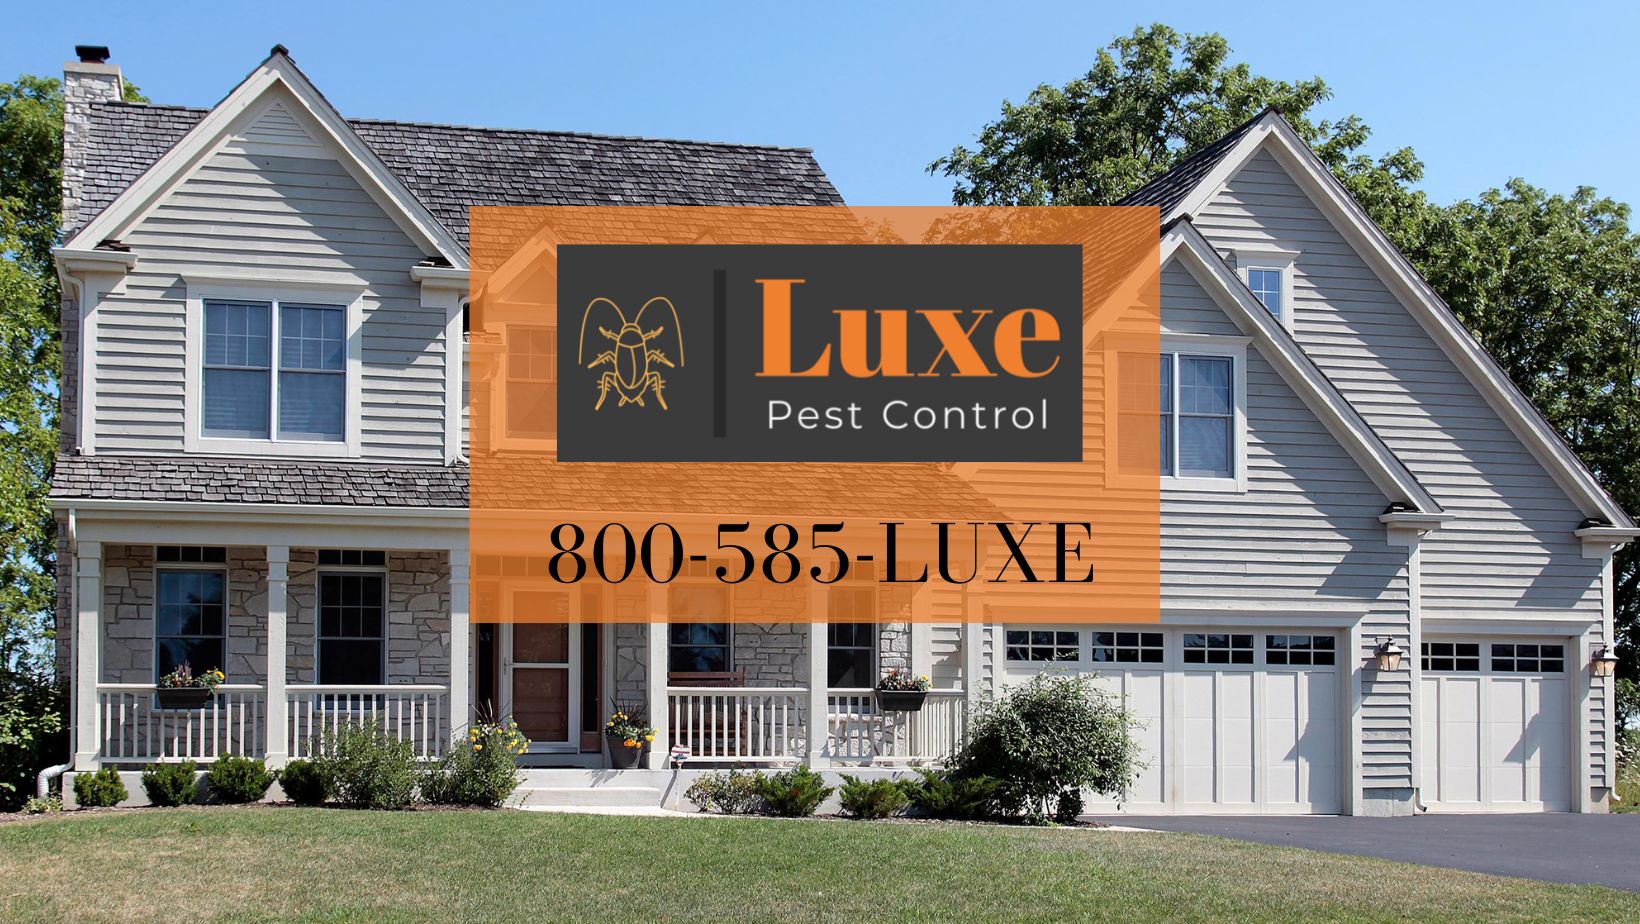 Luxe Pest Control